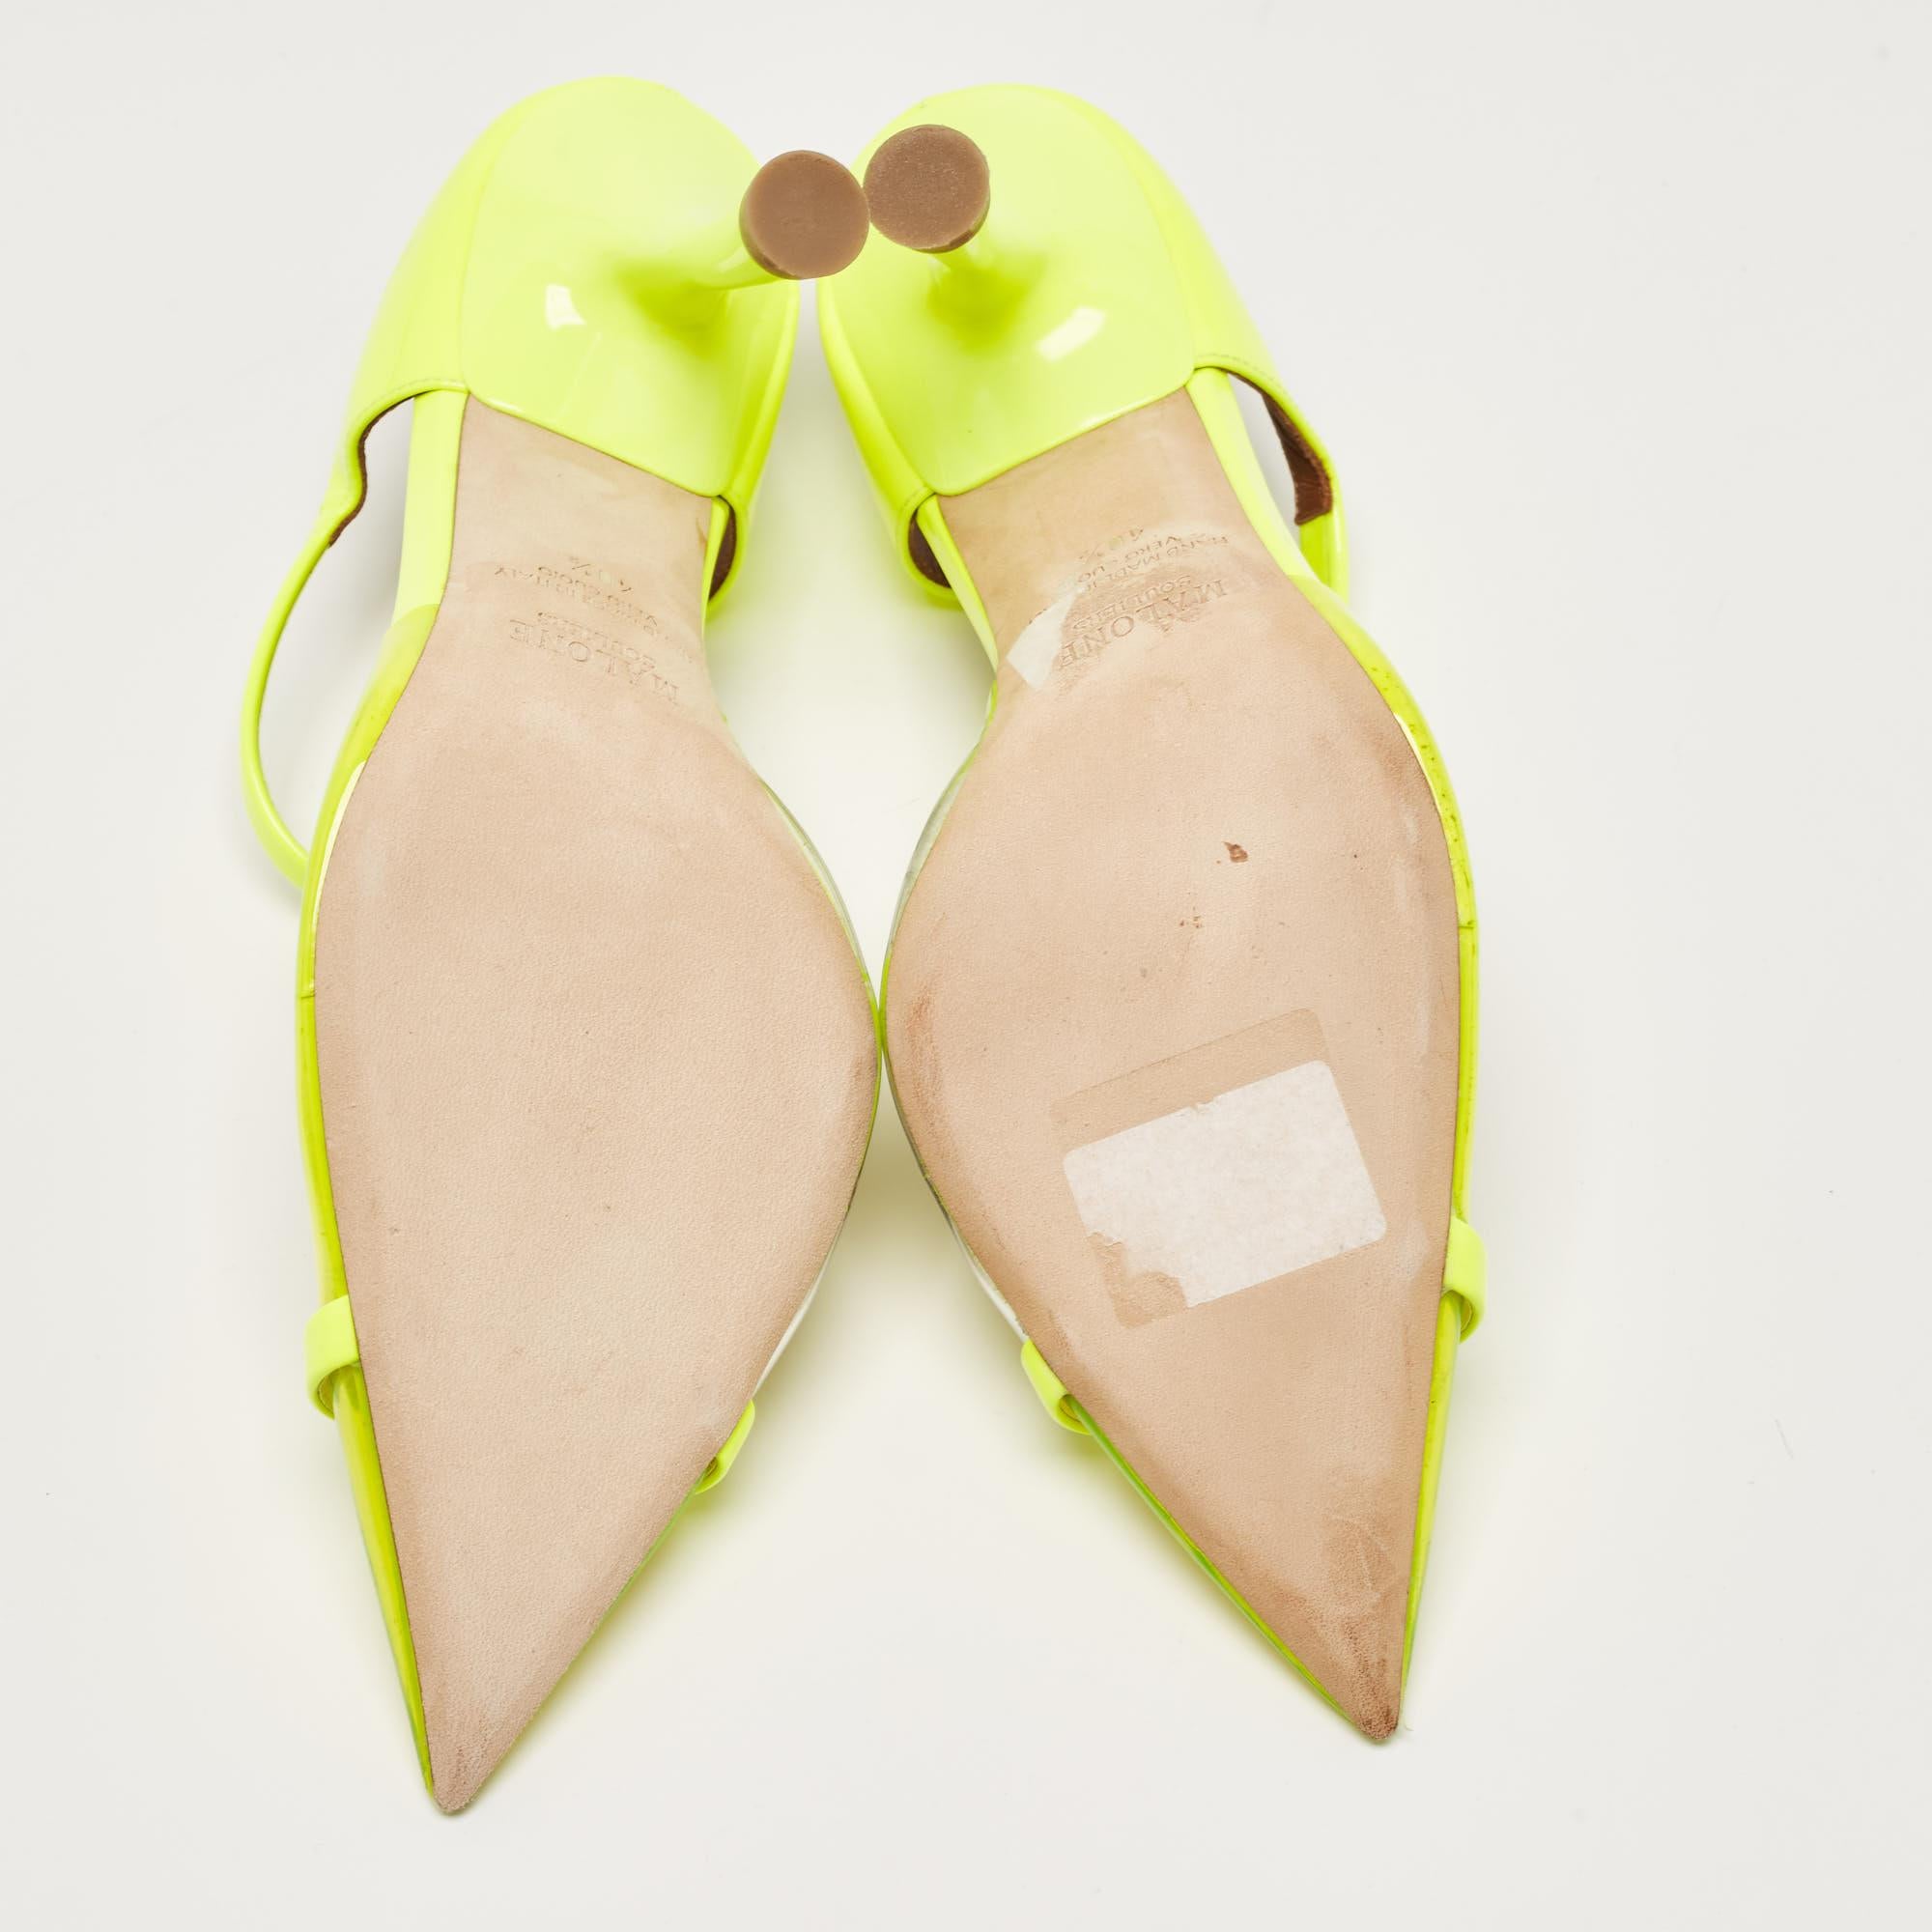 Malone Souliers Neon Green Iona Heel Mules Size 40.5 In Excellent Condition For Sale In Dubai, Al Qouz 2